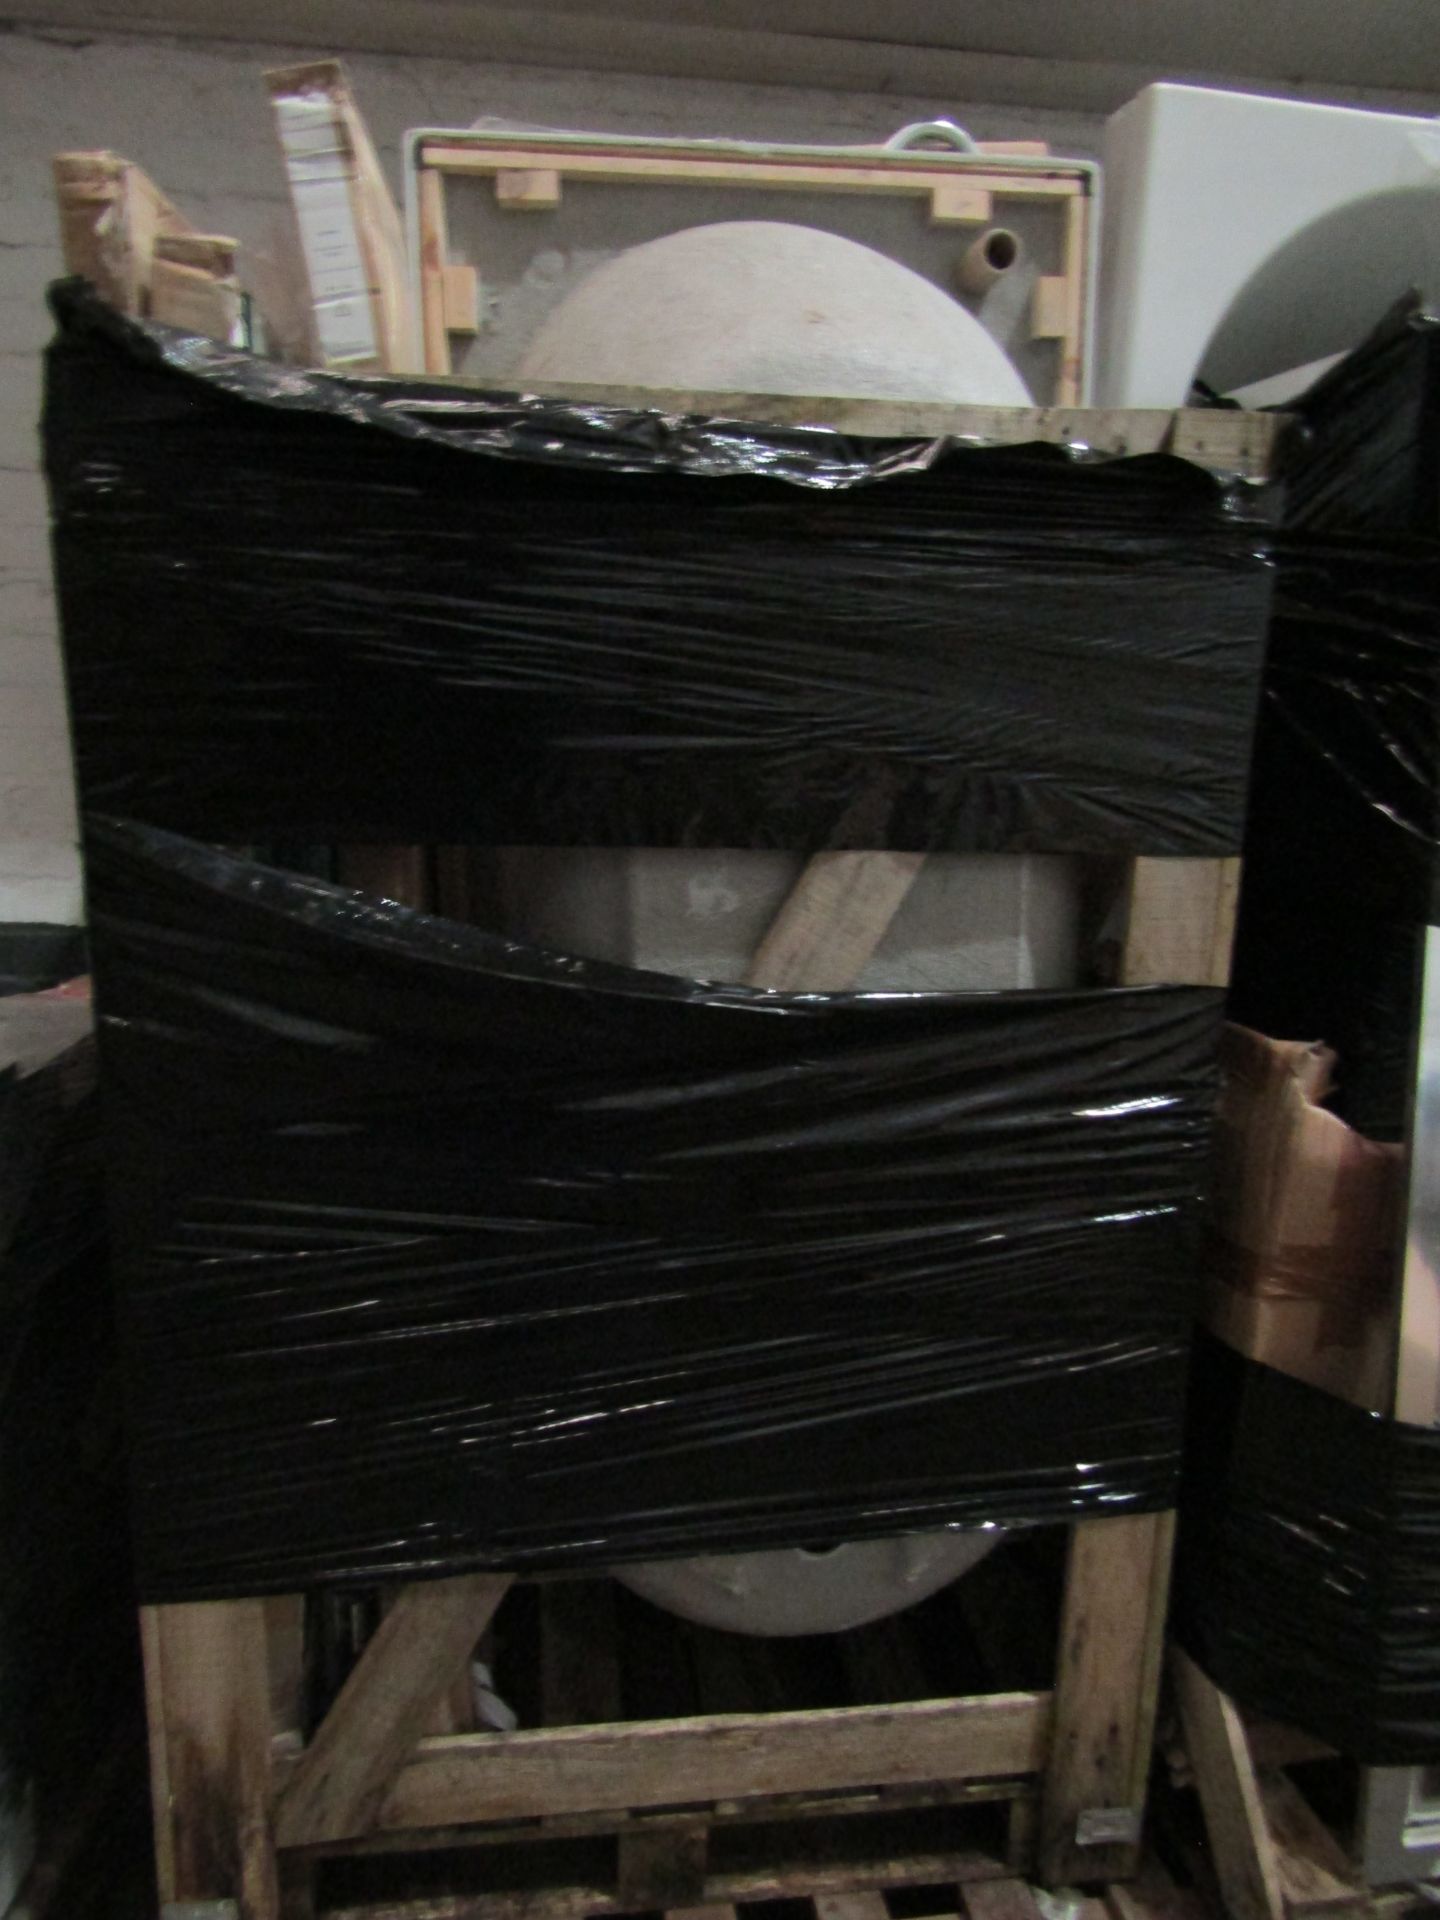 3x Pallets containing bathroom items such as showe screens, approx 6x baths, shower trays and more. - Image 3 of 3